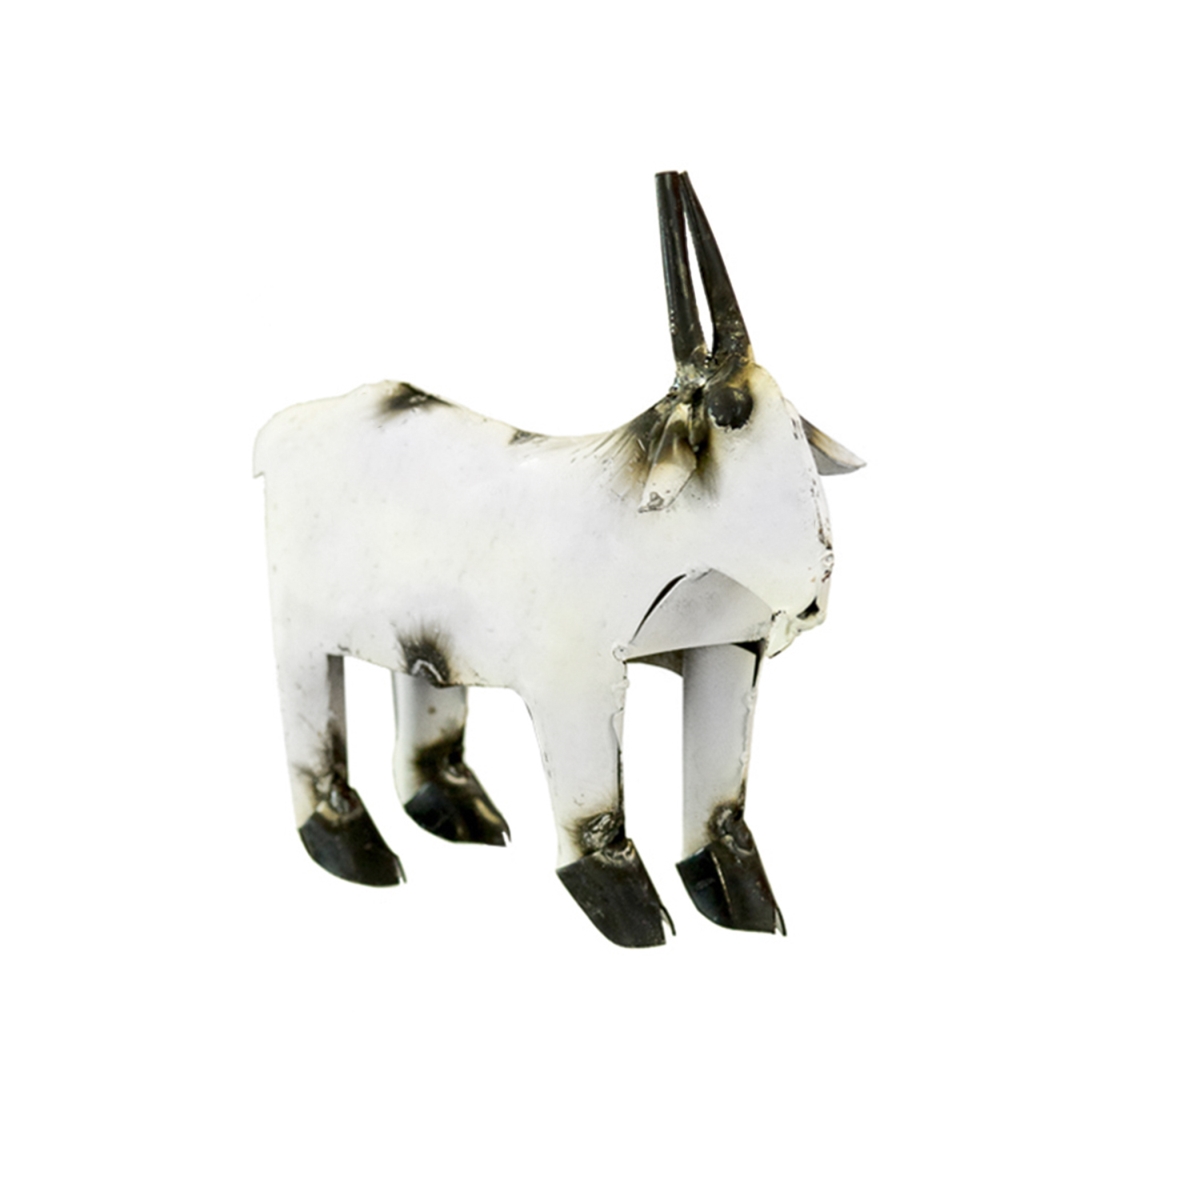 10260 Goat For Decor, 3 X 9.5 X 7 In.